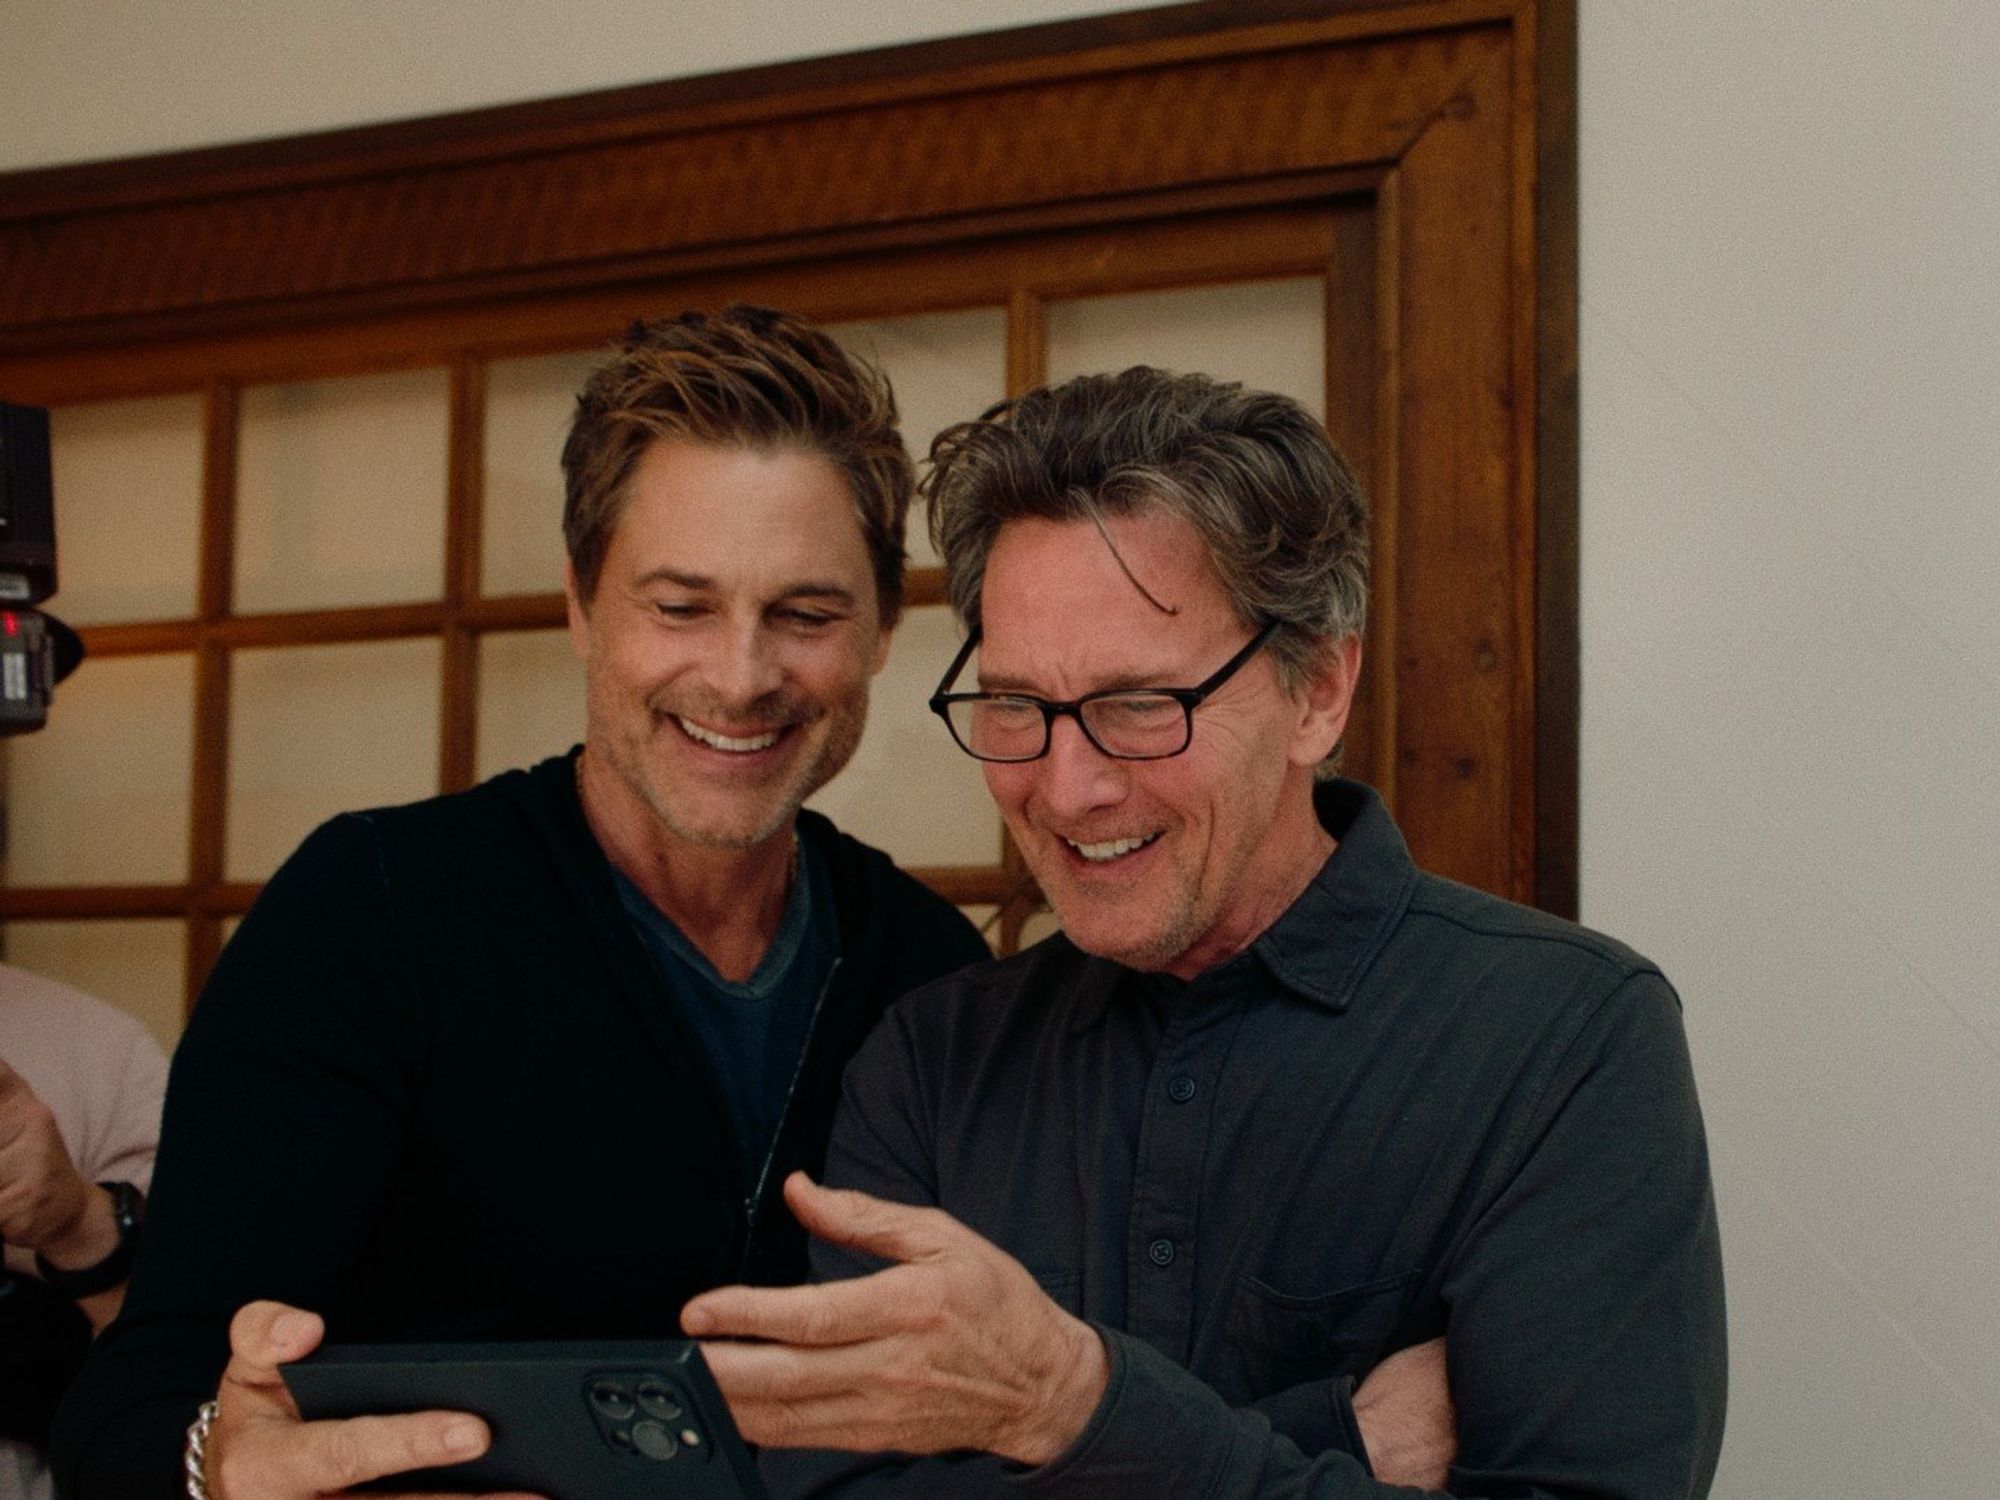 Rob Lowe and Andrew McCarthy in Brats